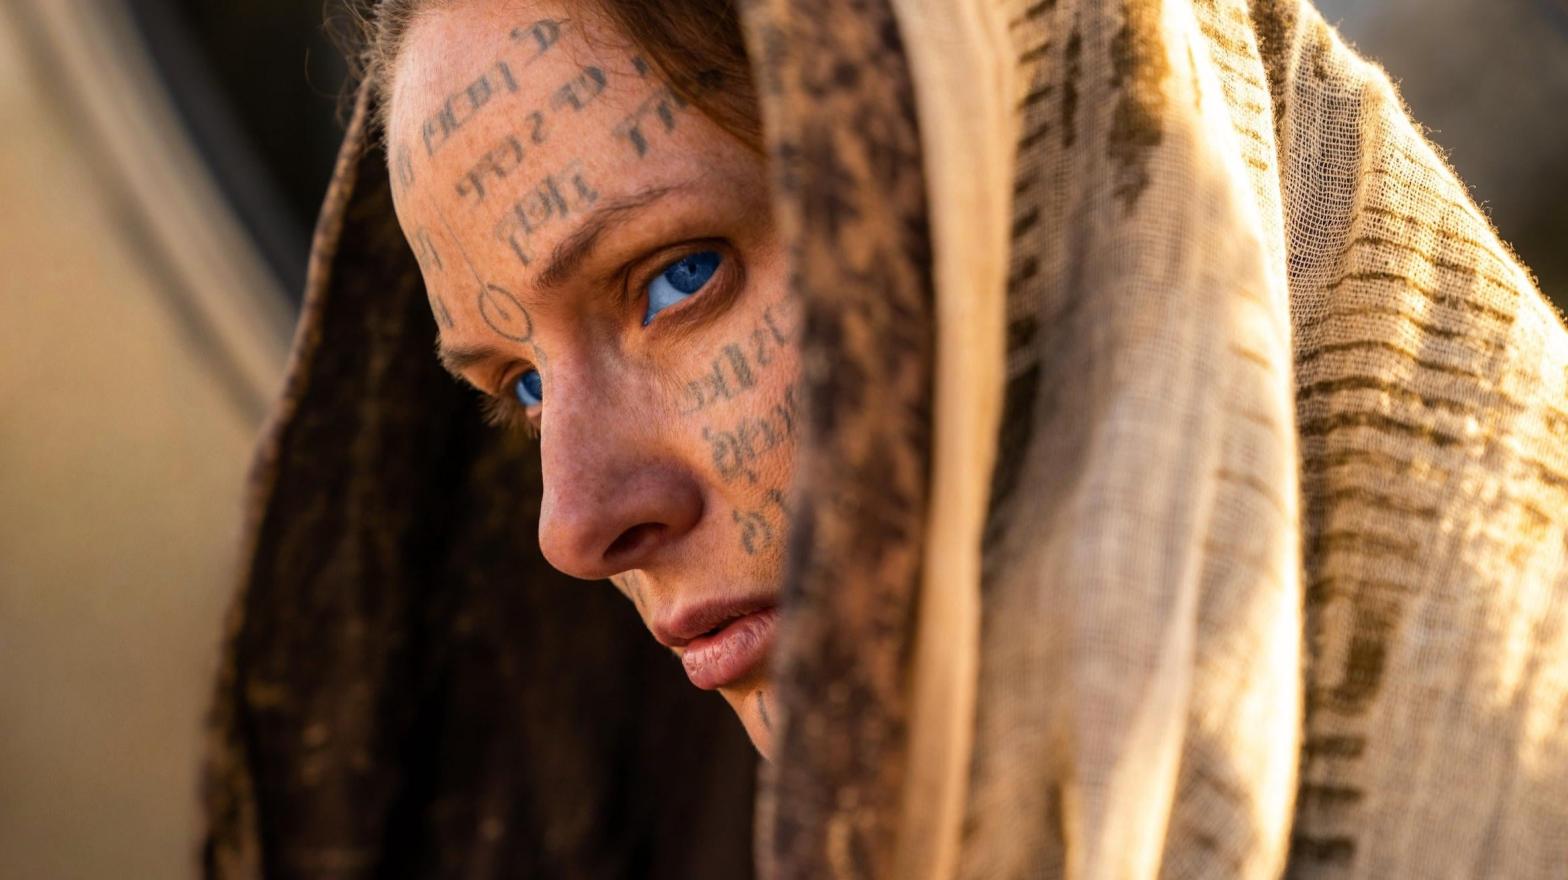 Lady Jessica in the new Dune: Part Two trailer. (Image: Warner Bros.)